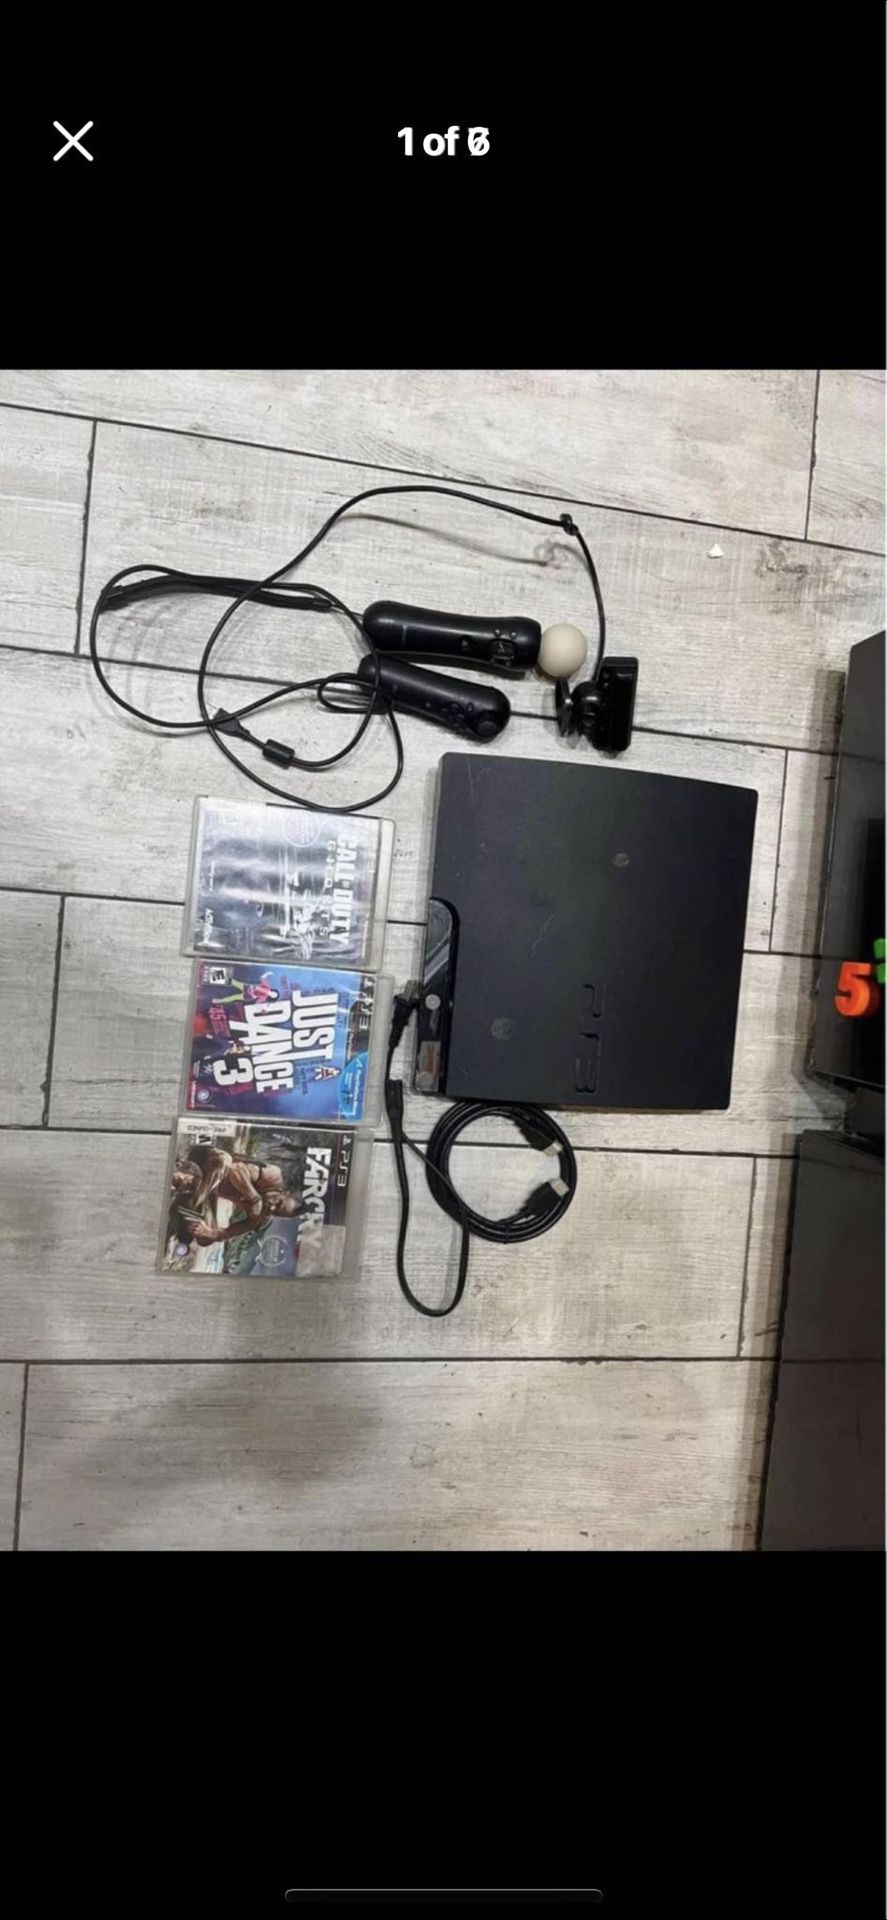 PS3 Bundle With Games